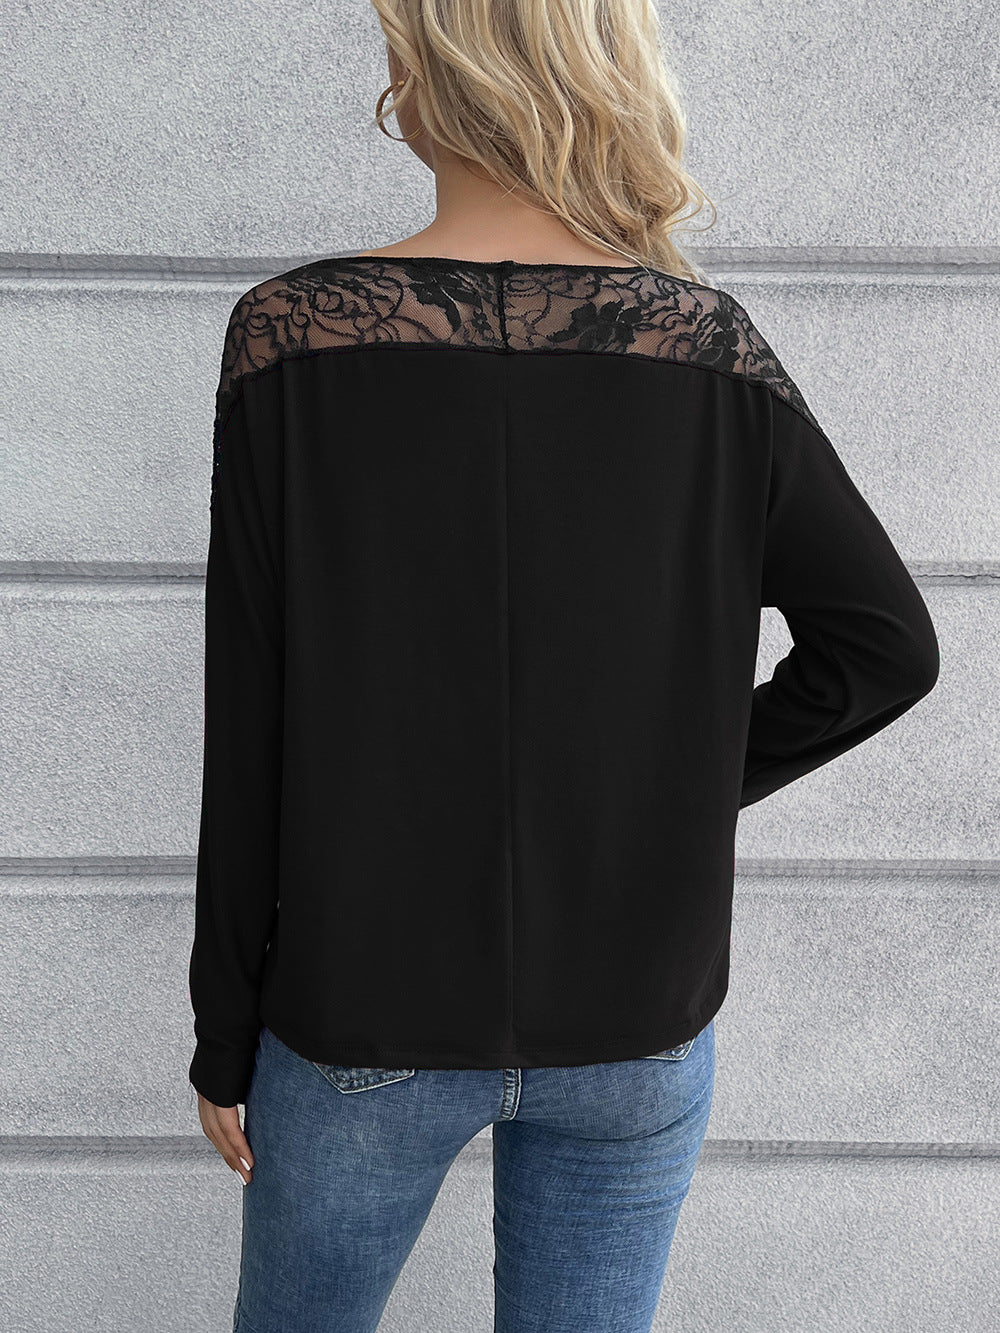 Women’s Lace Long Sleeve Round Neck Tee